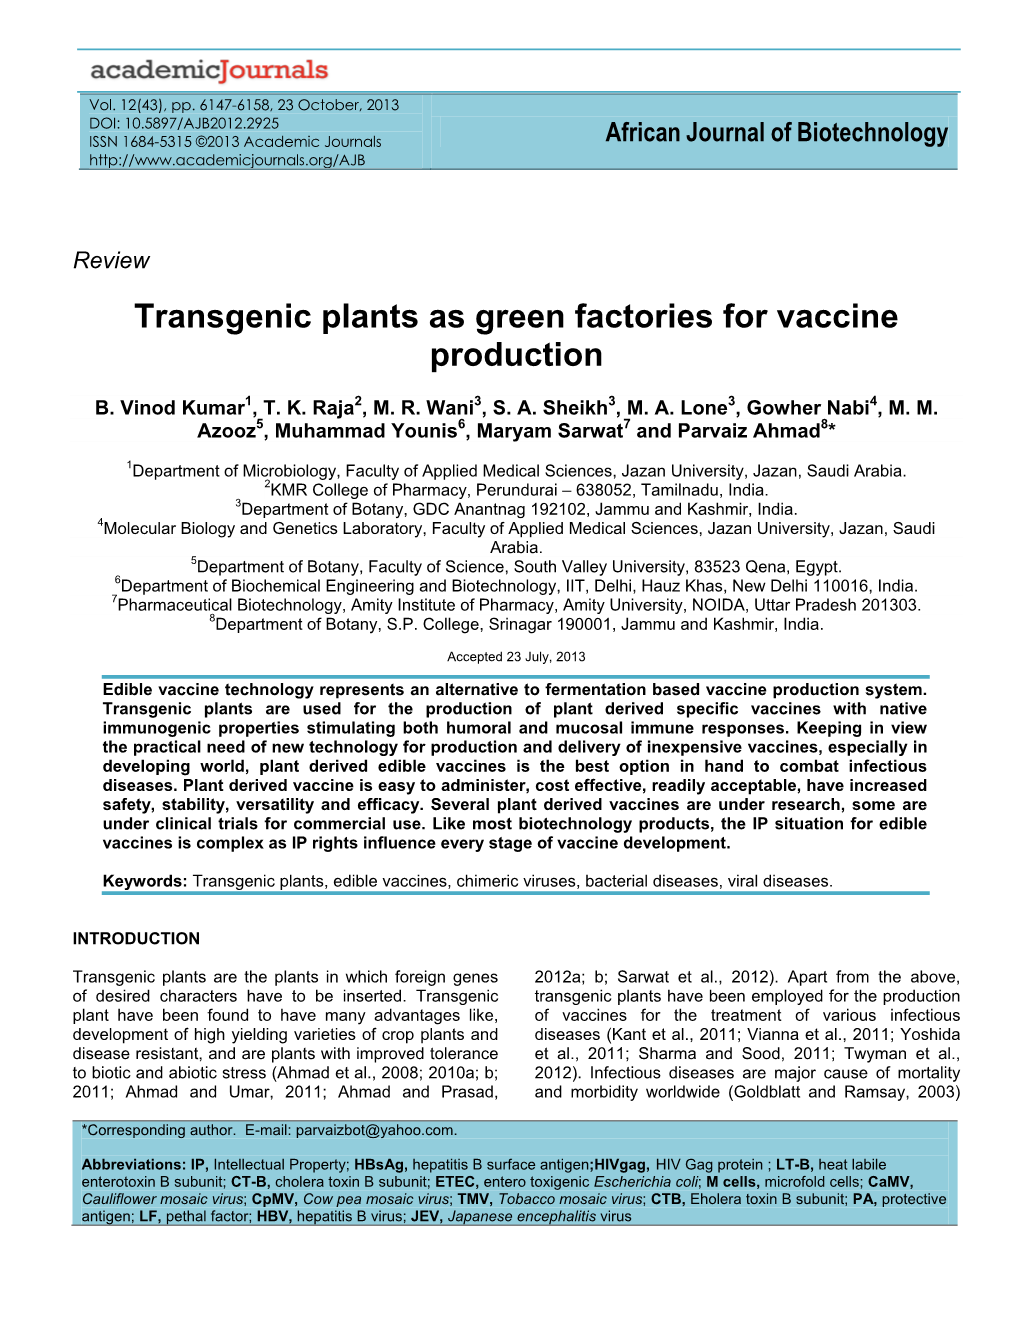 Transgenic Plants As Green Factories for Vaccine Production